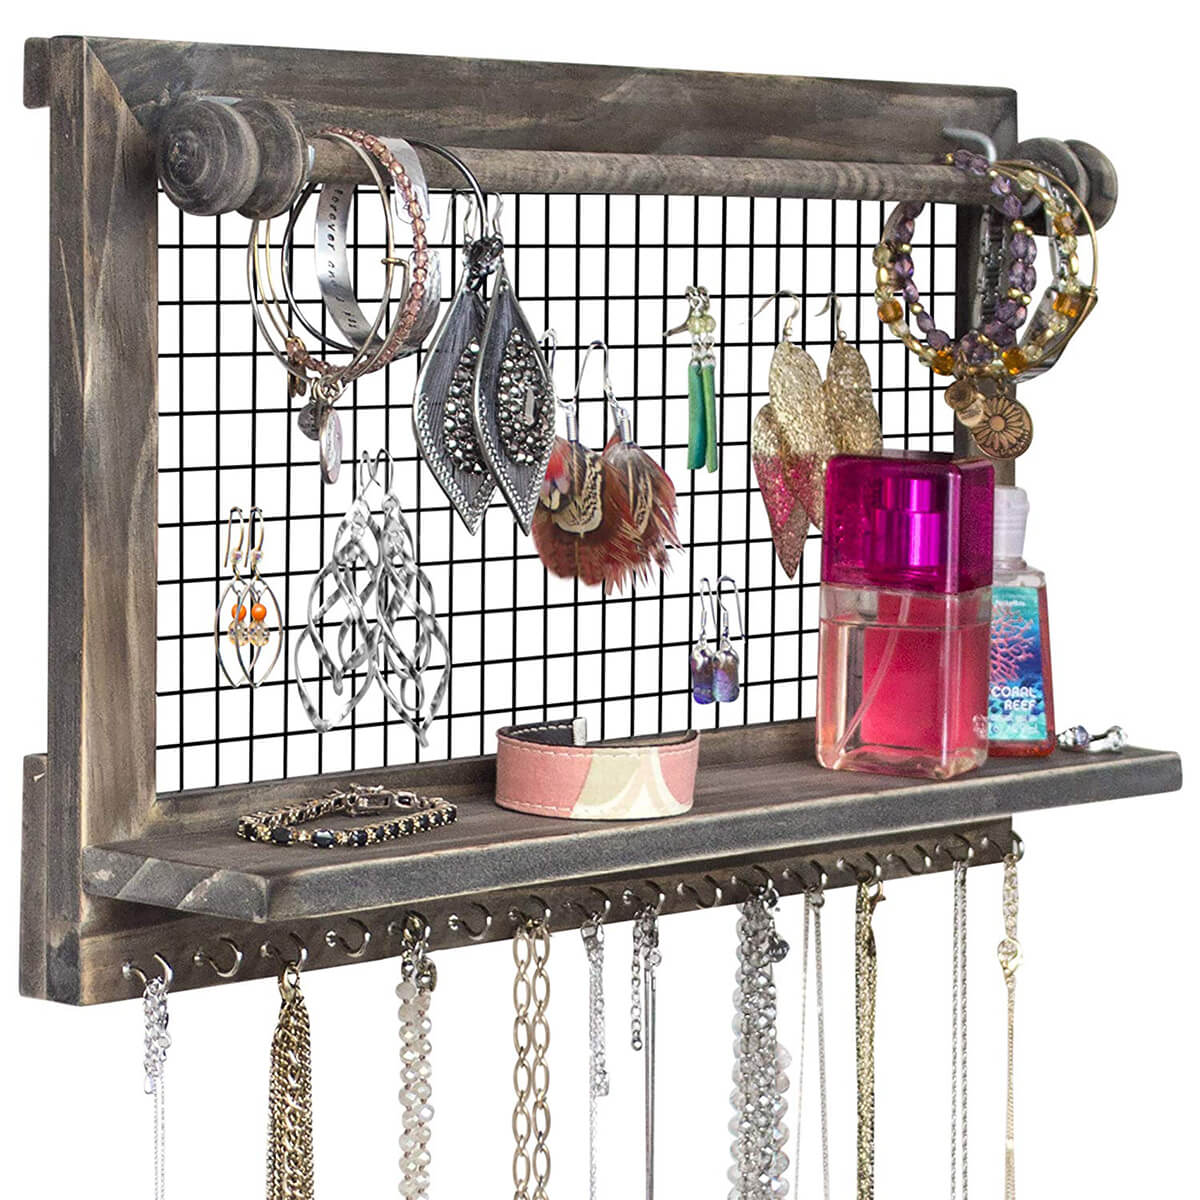 The Perfect Jewelry Organizer for Any Room